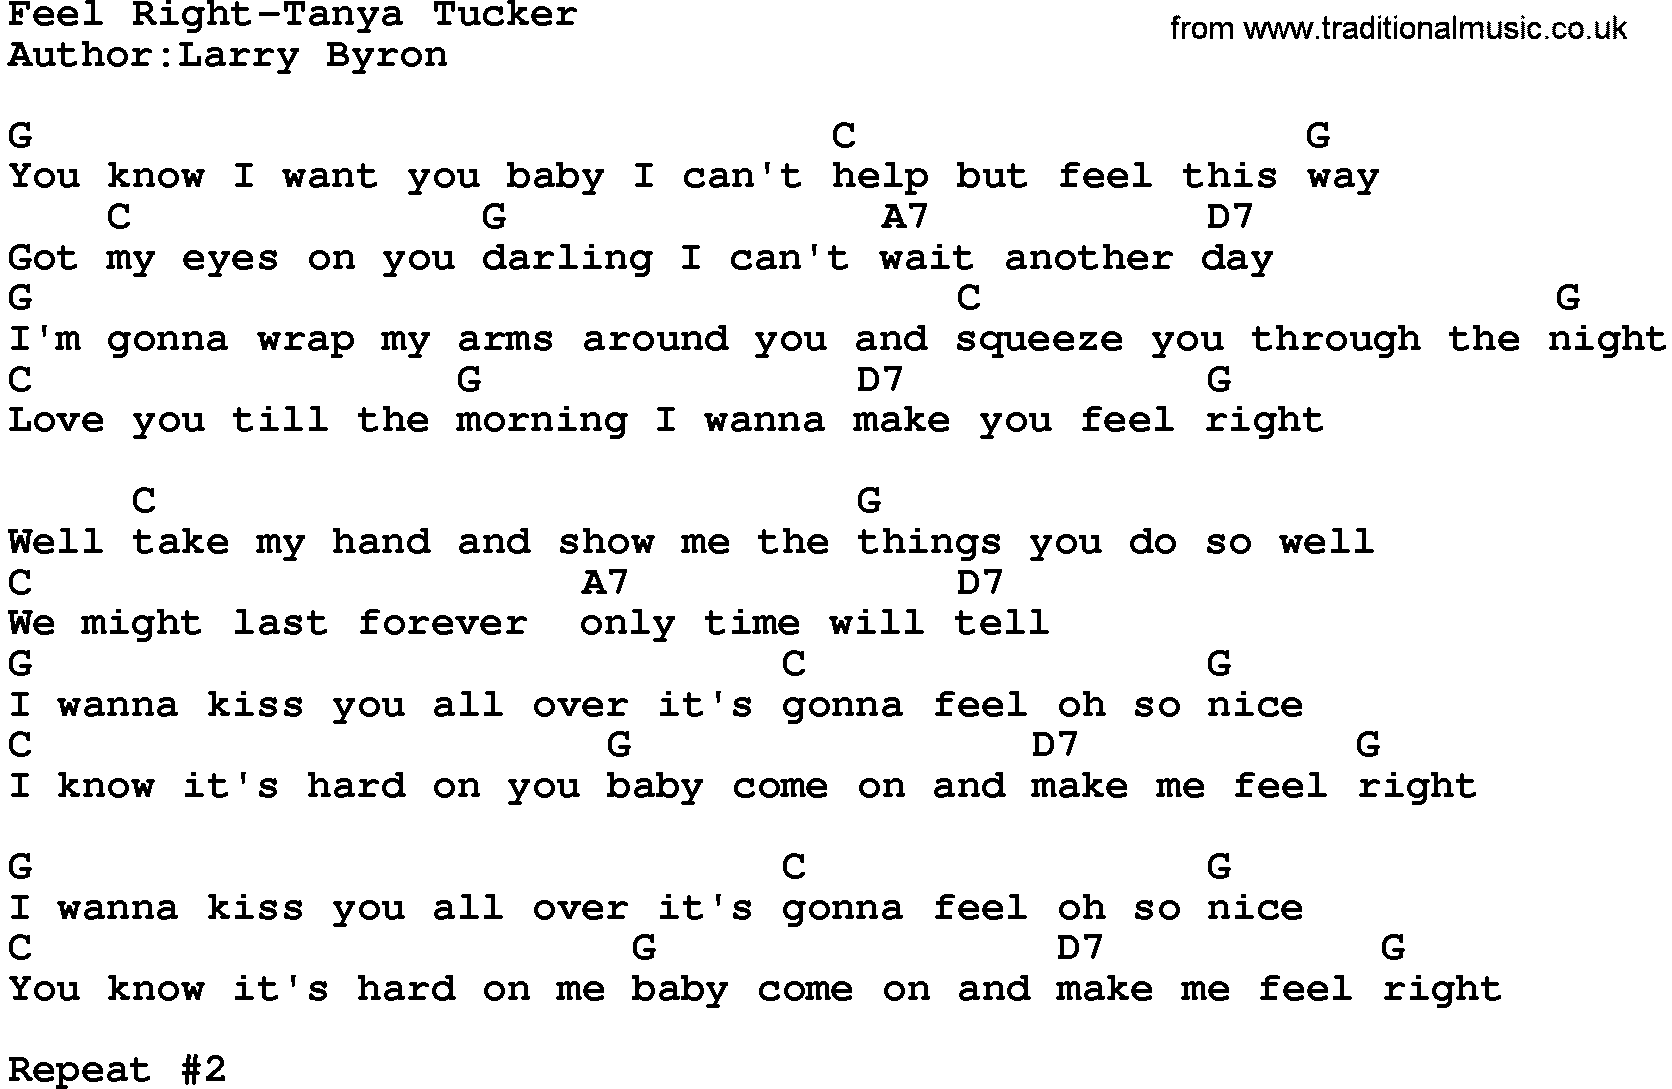 Country music song: Feel Right-Tanya Tucker lyrics and chords